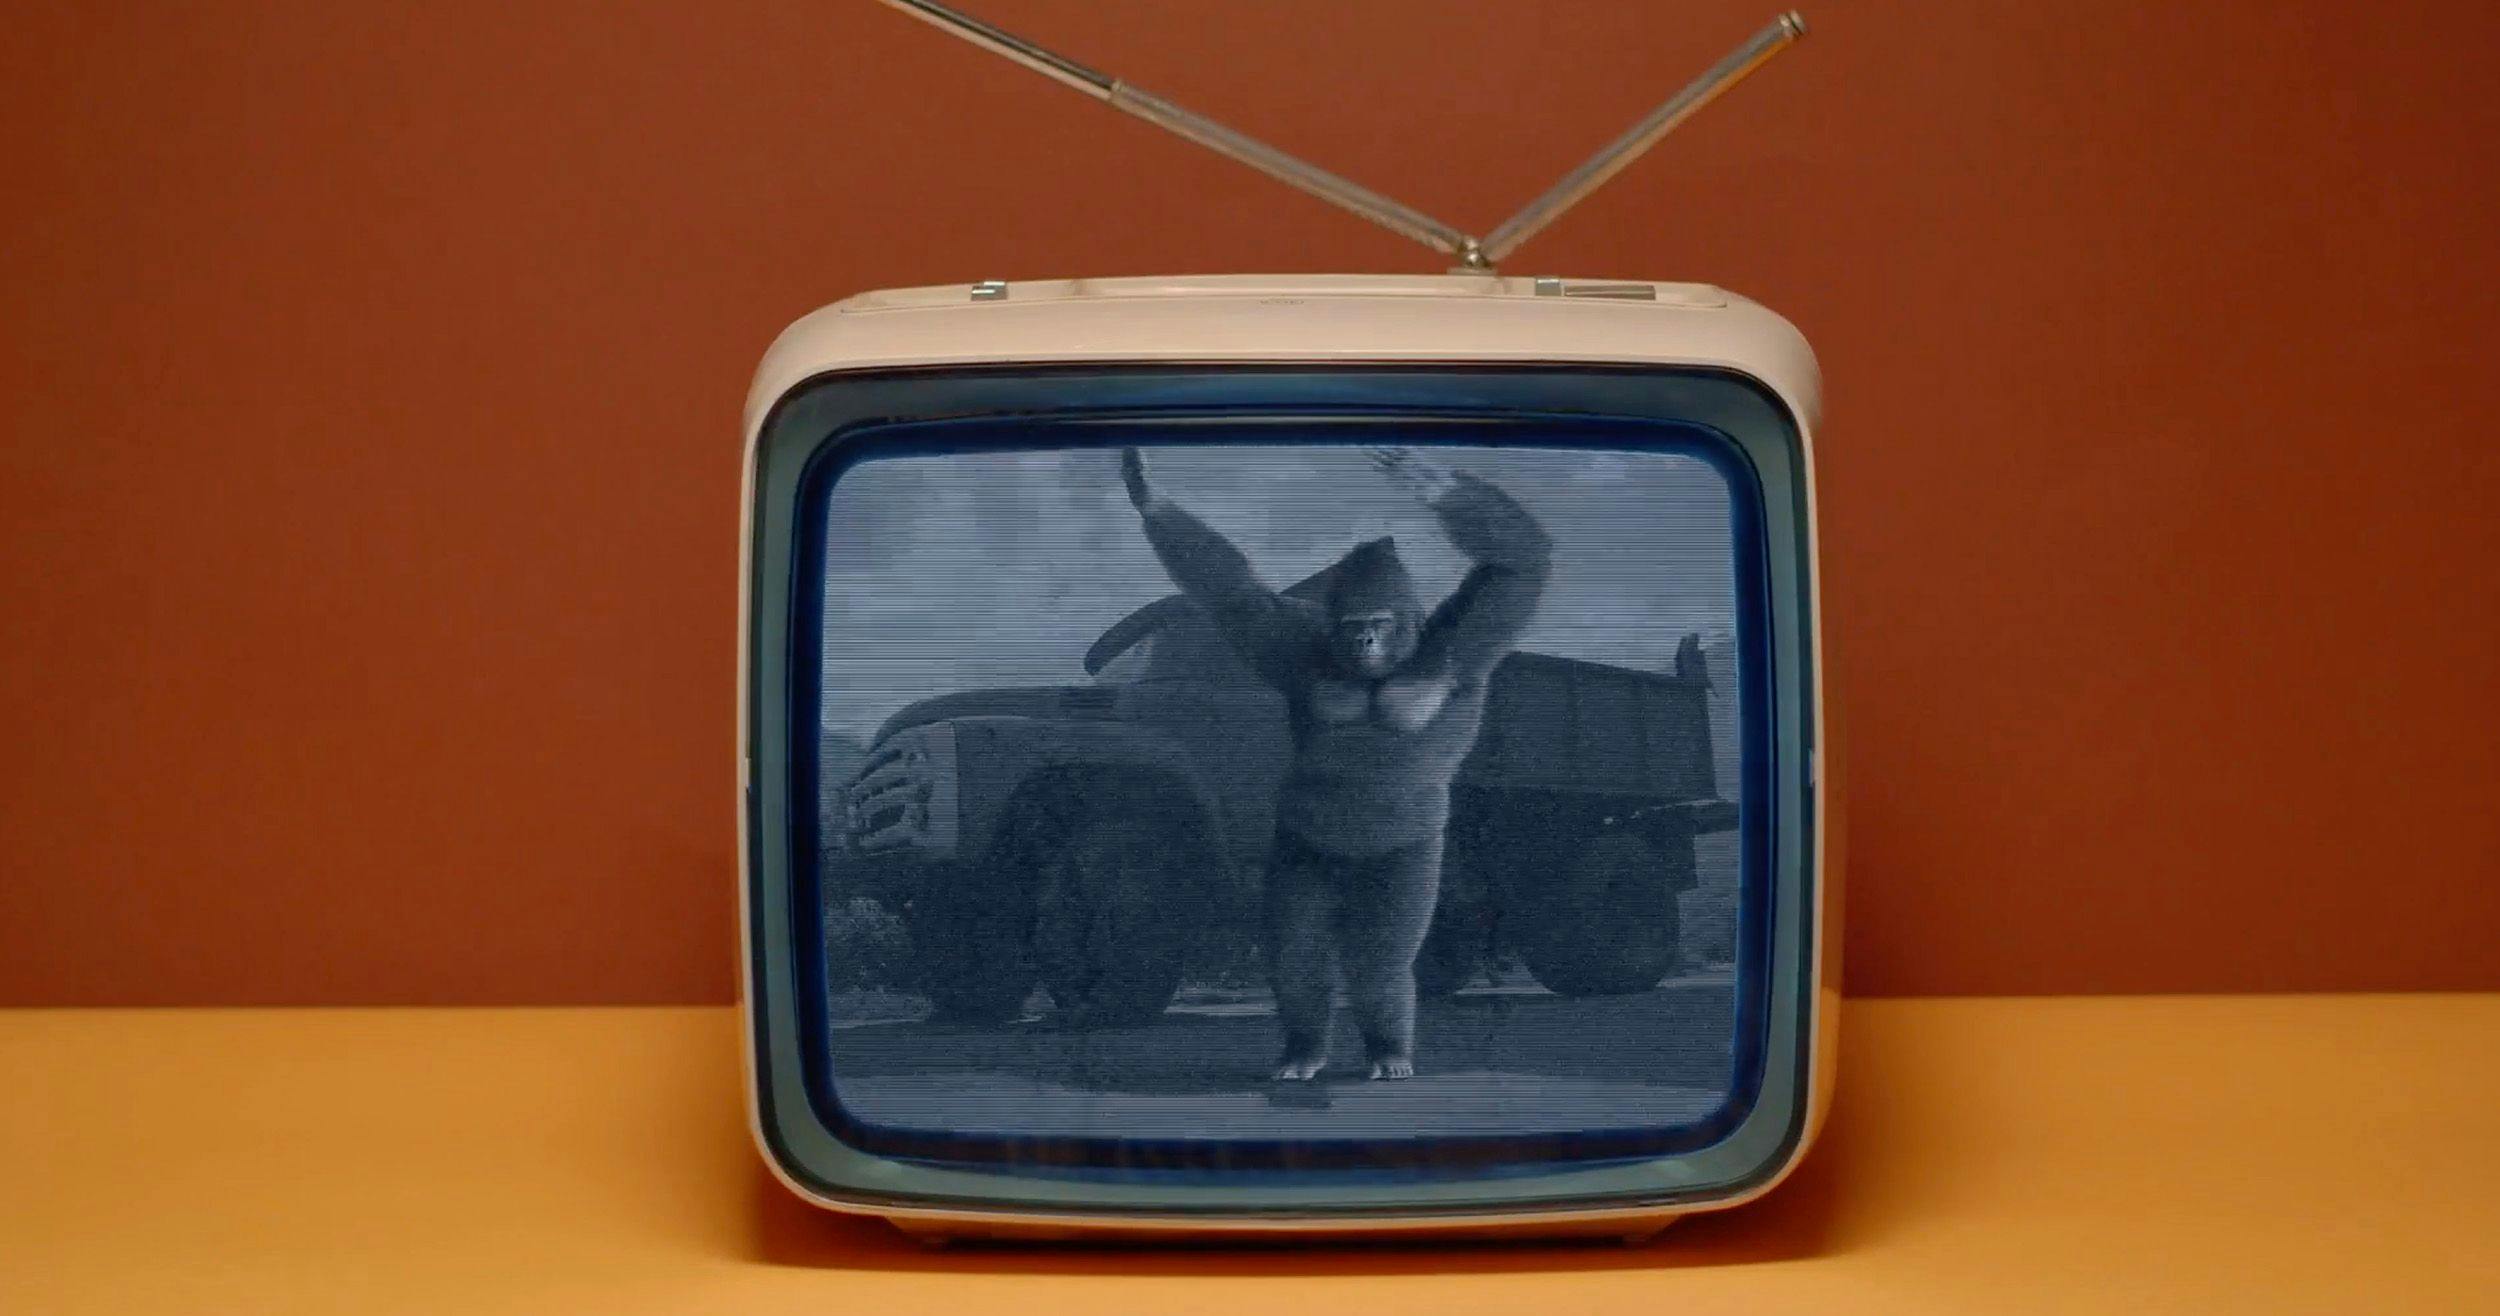 Gorilla dancing in front of a retro truck on an old-school TV.